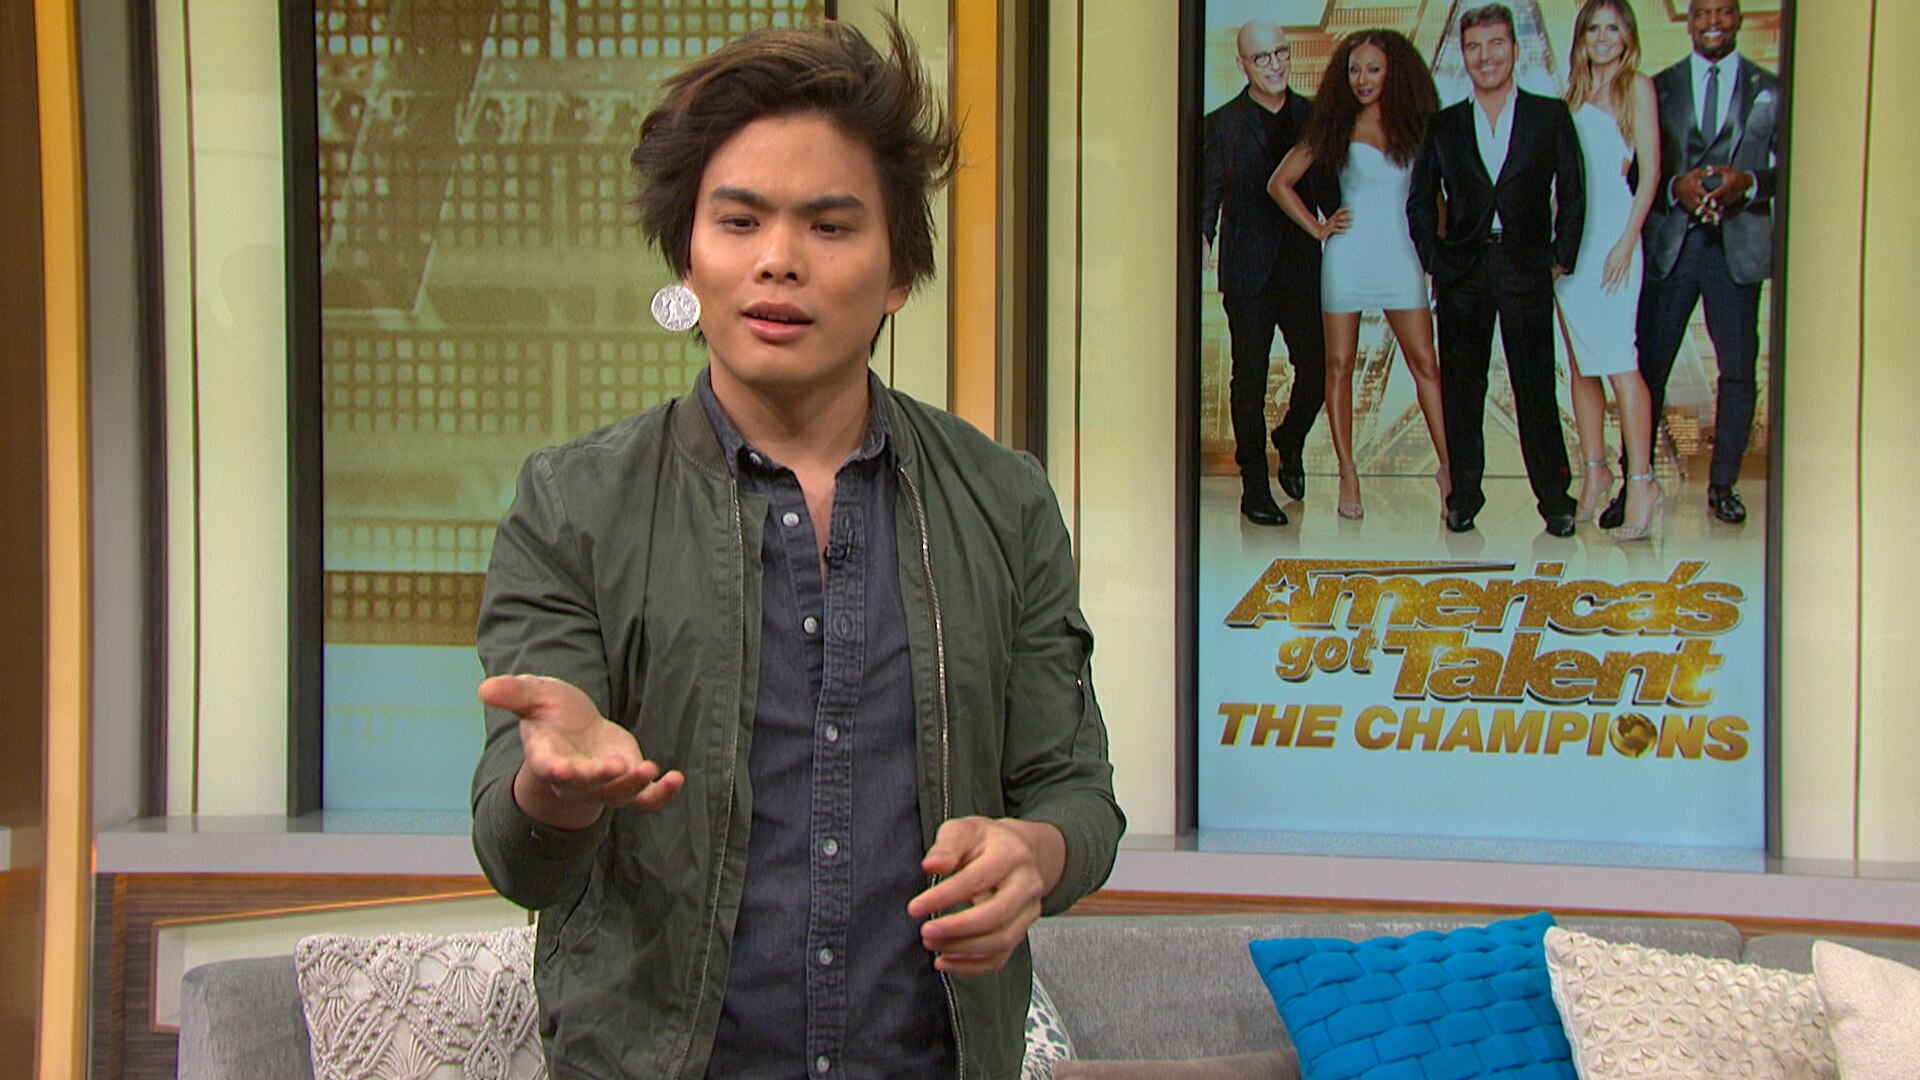 Magician Shin Lim crowned winner of Americas Got Talent: The Champions